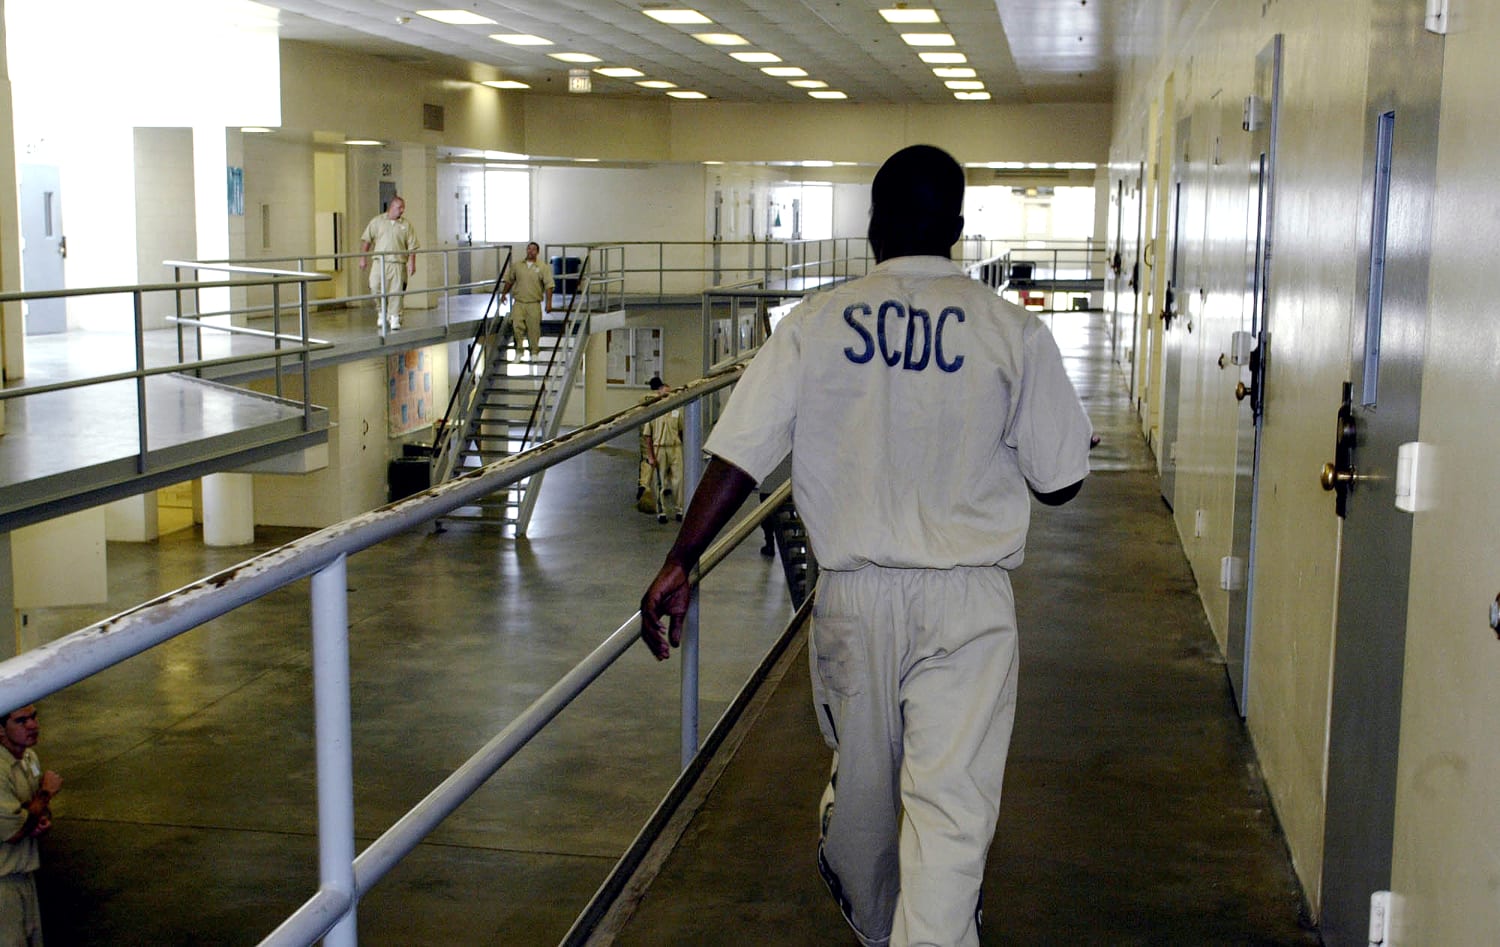 Video shows man left to die in South Carolina prison yard